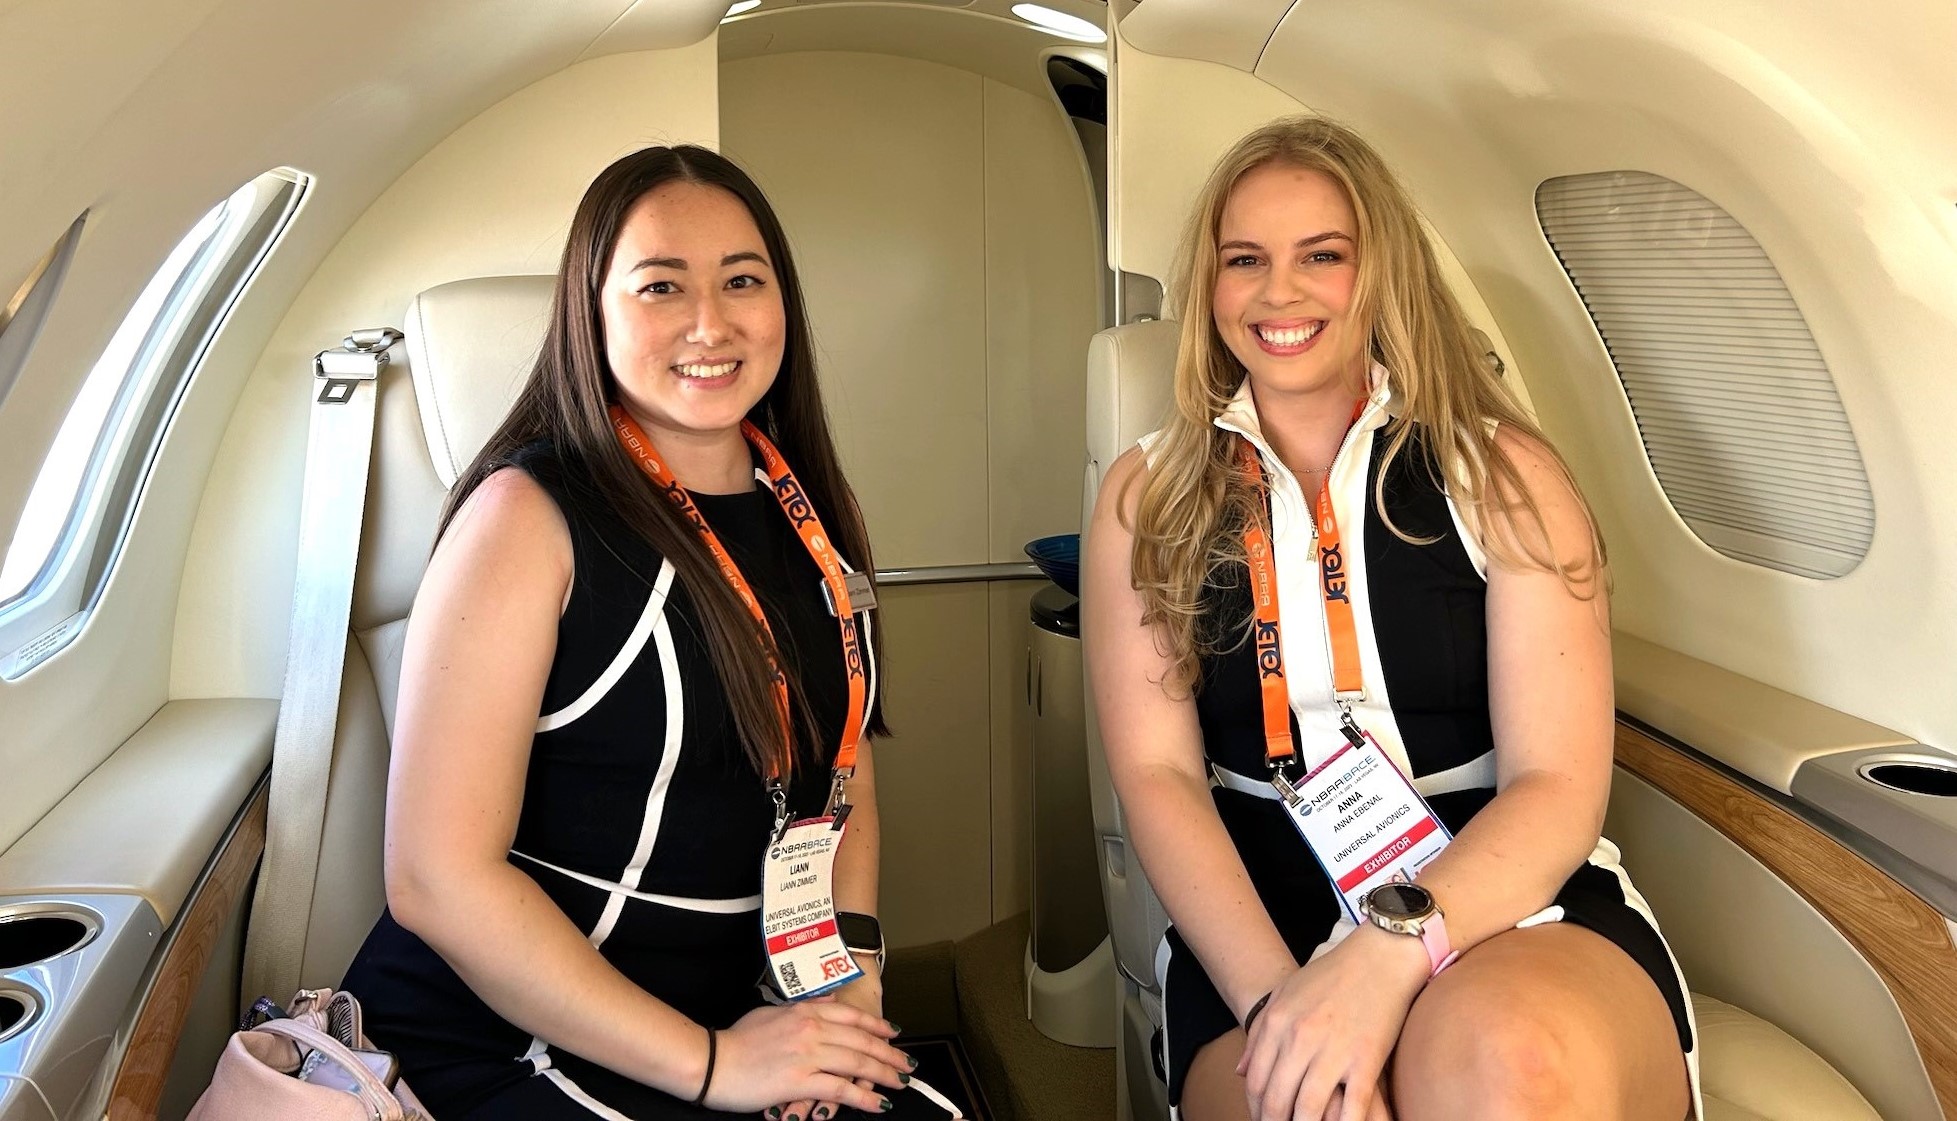 Anna Ebenal (right) pictured with Liann Zimmer (left) sitting inside of a business jet.